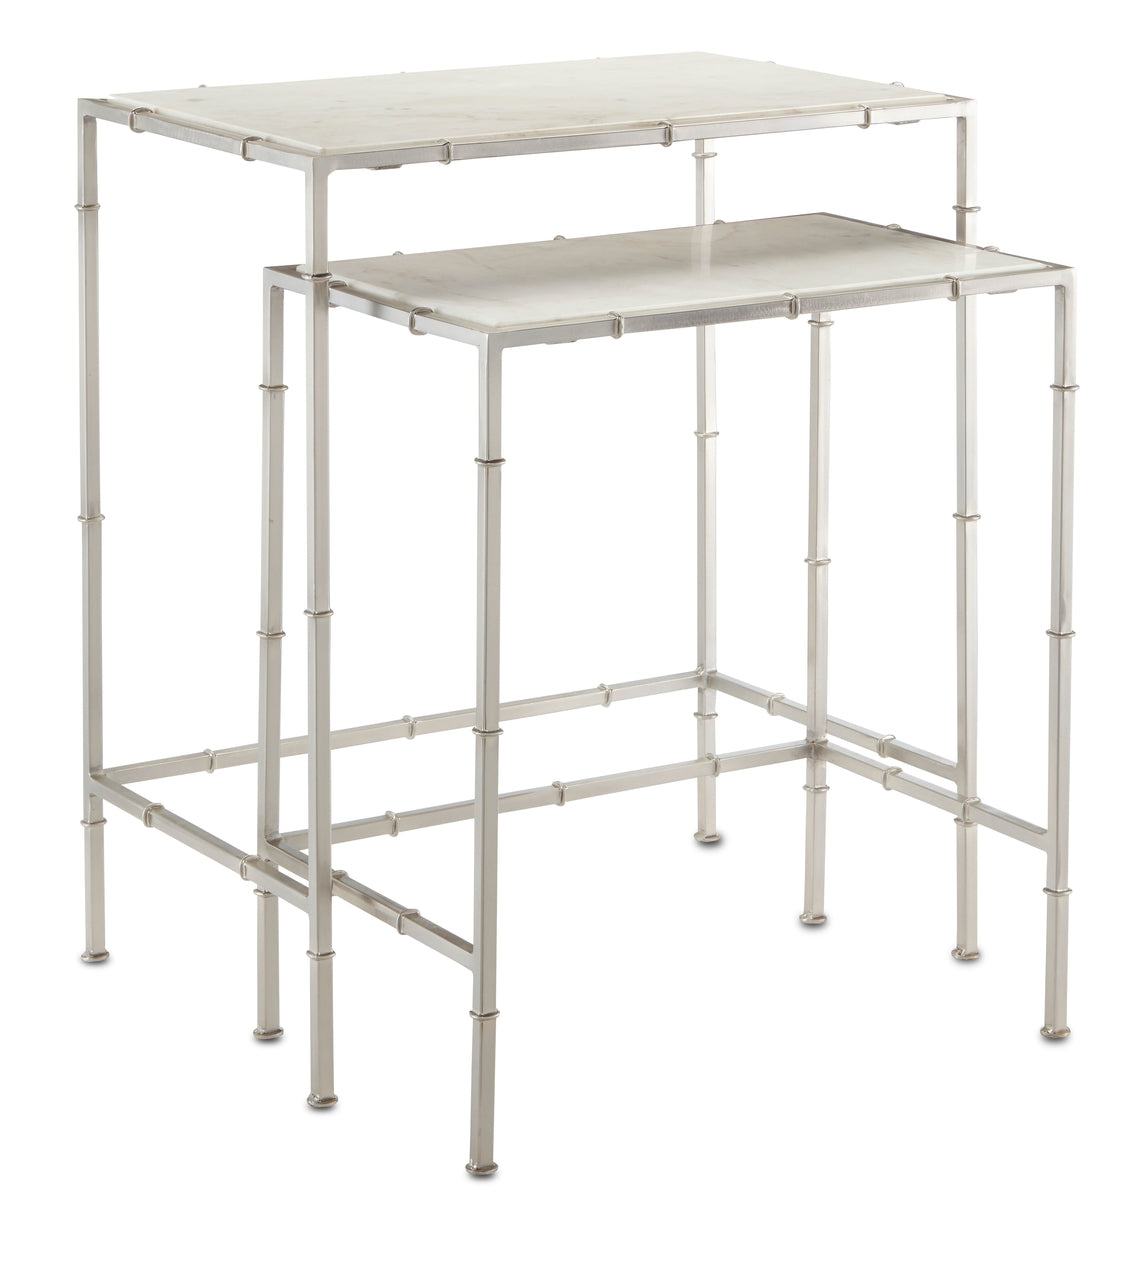 Currey and Company Harte Nesting Table Set of 2 - Nickel/White